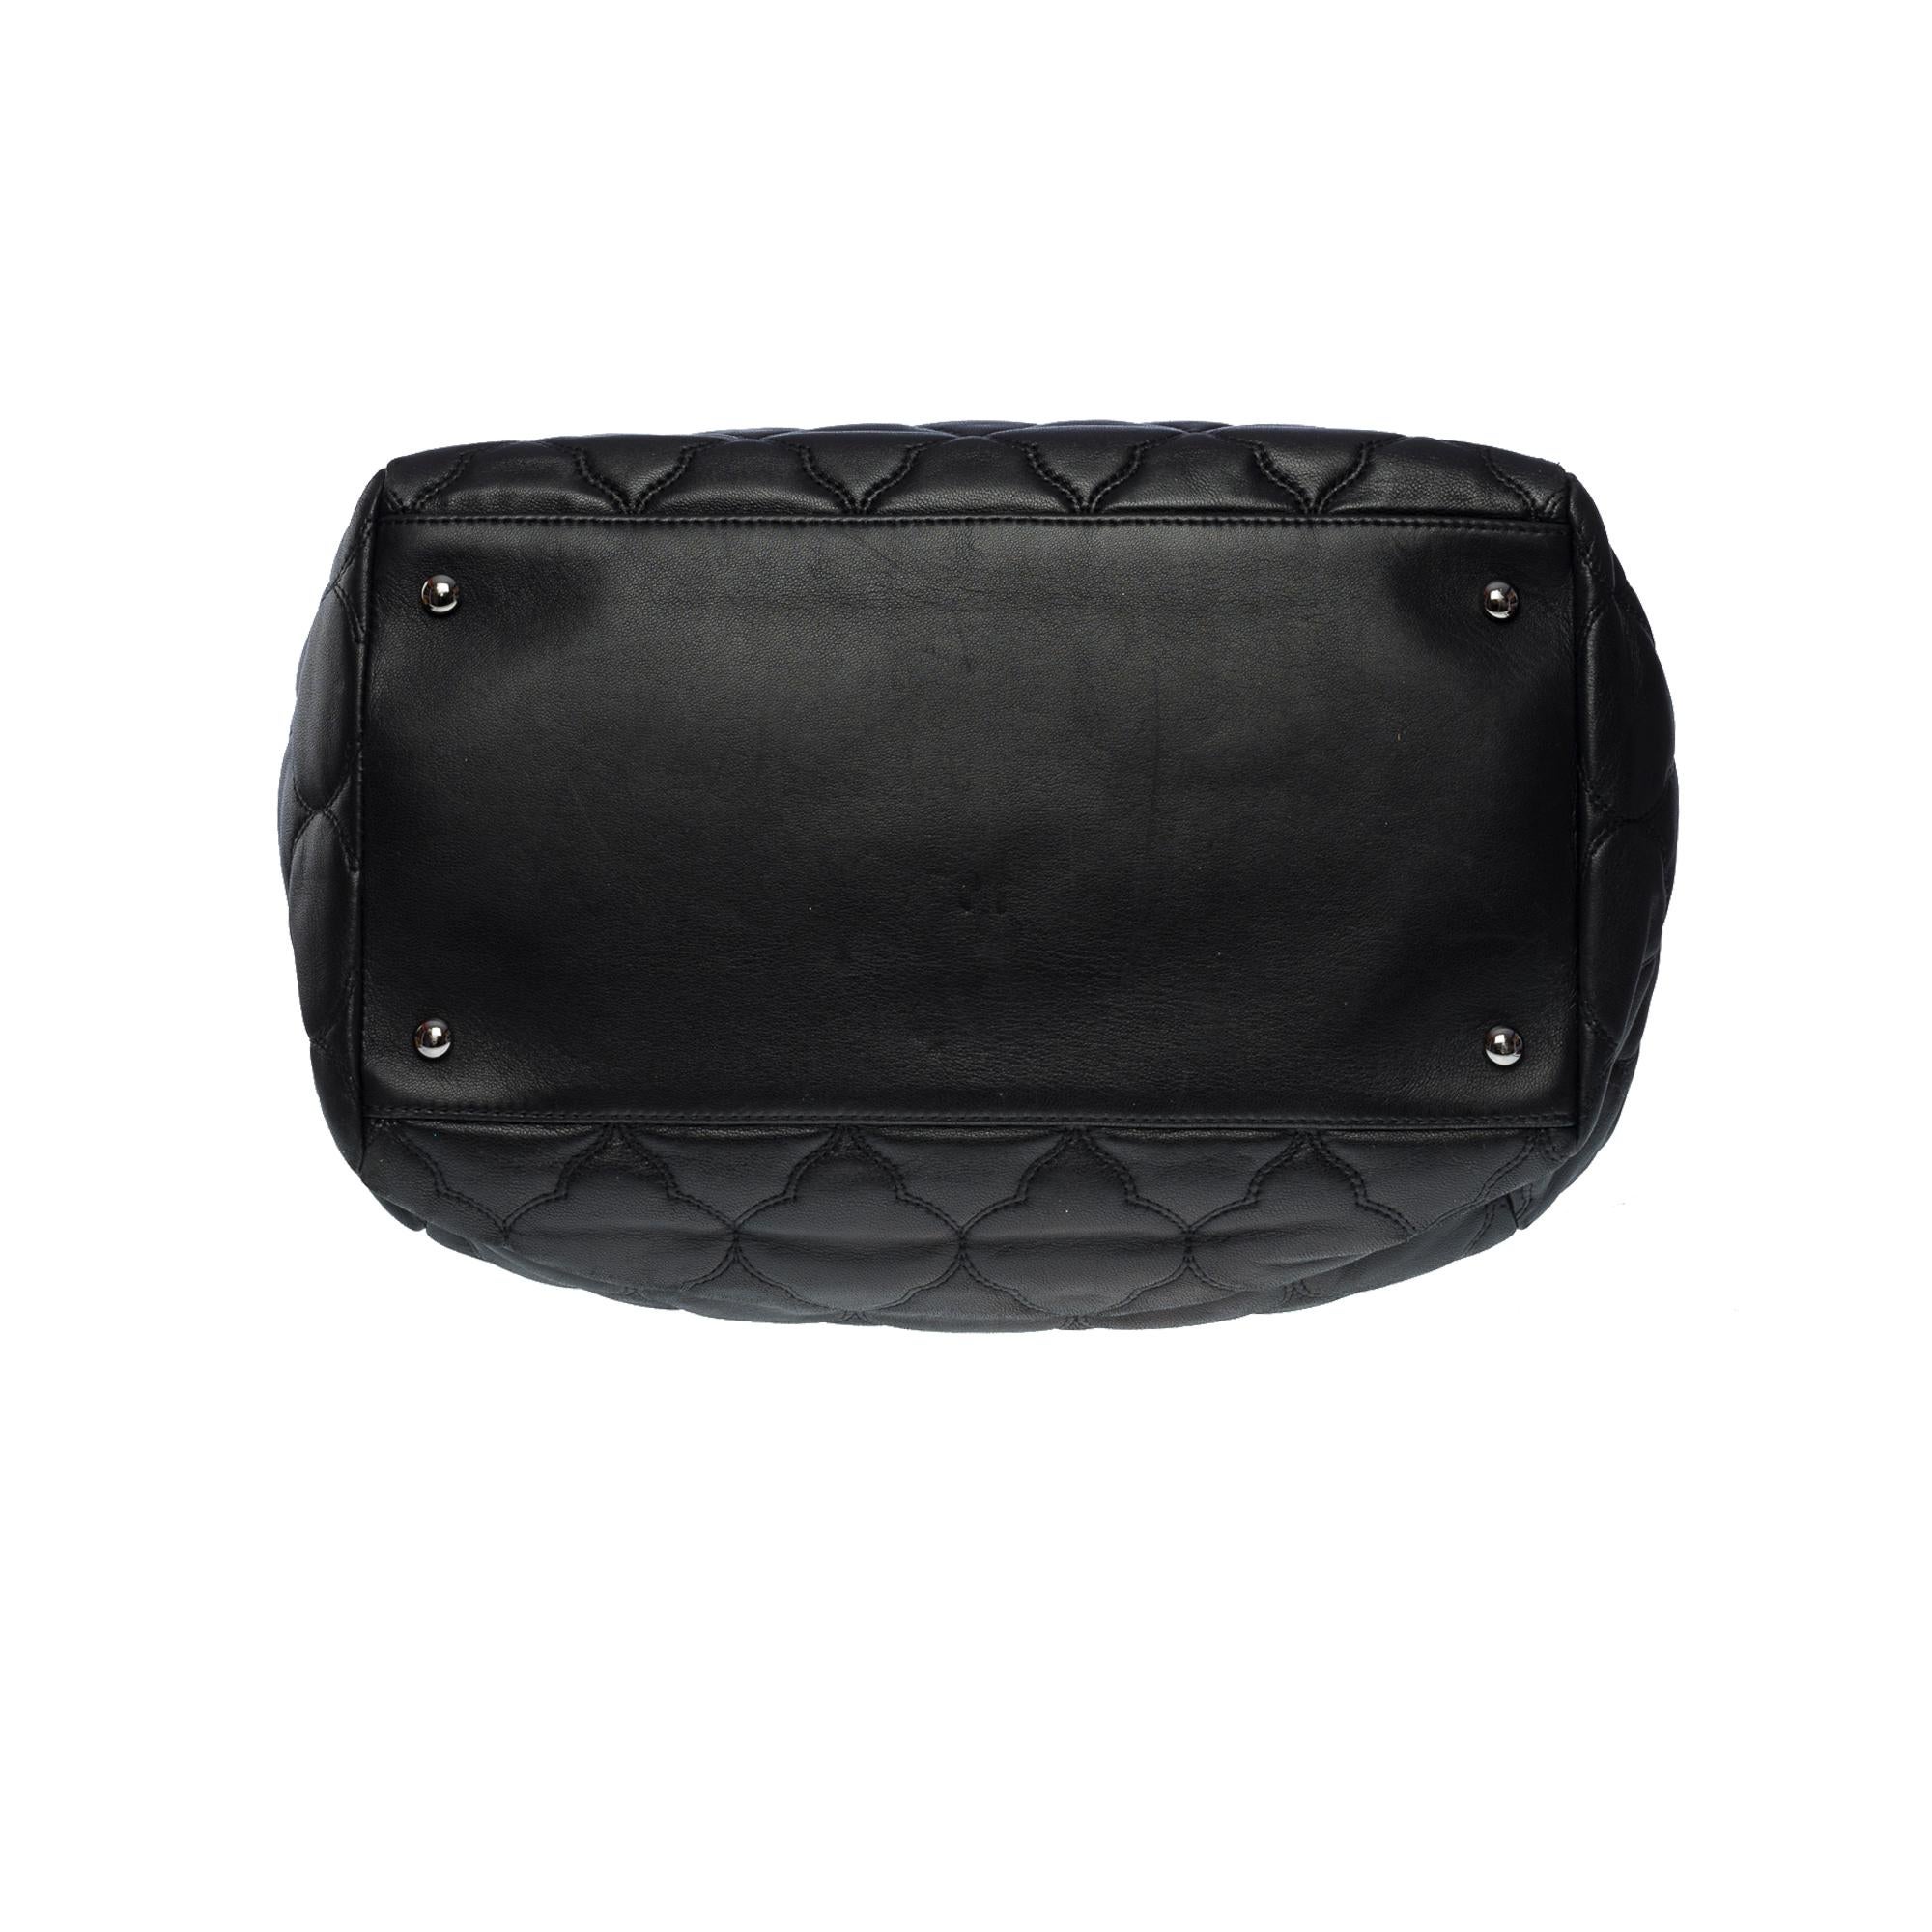 Amazing Chanel Hamptons shopping puffy bag in black quilted leather, SHW 3